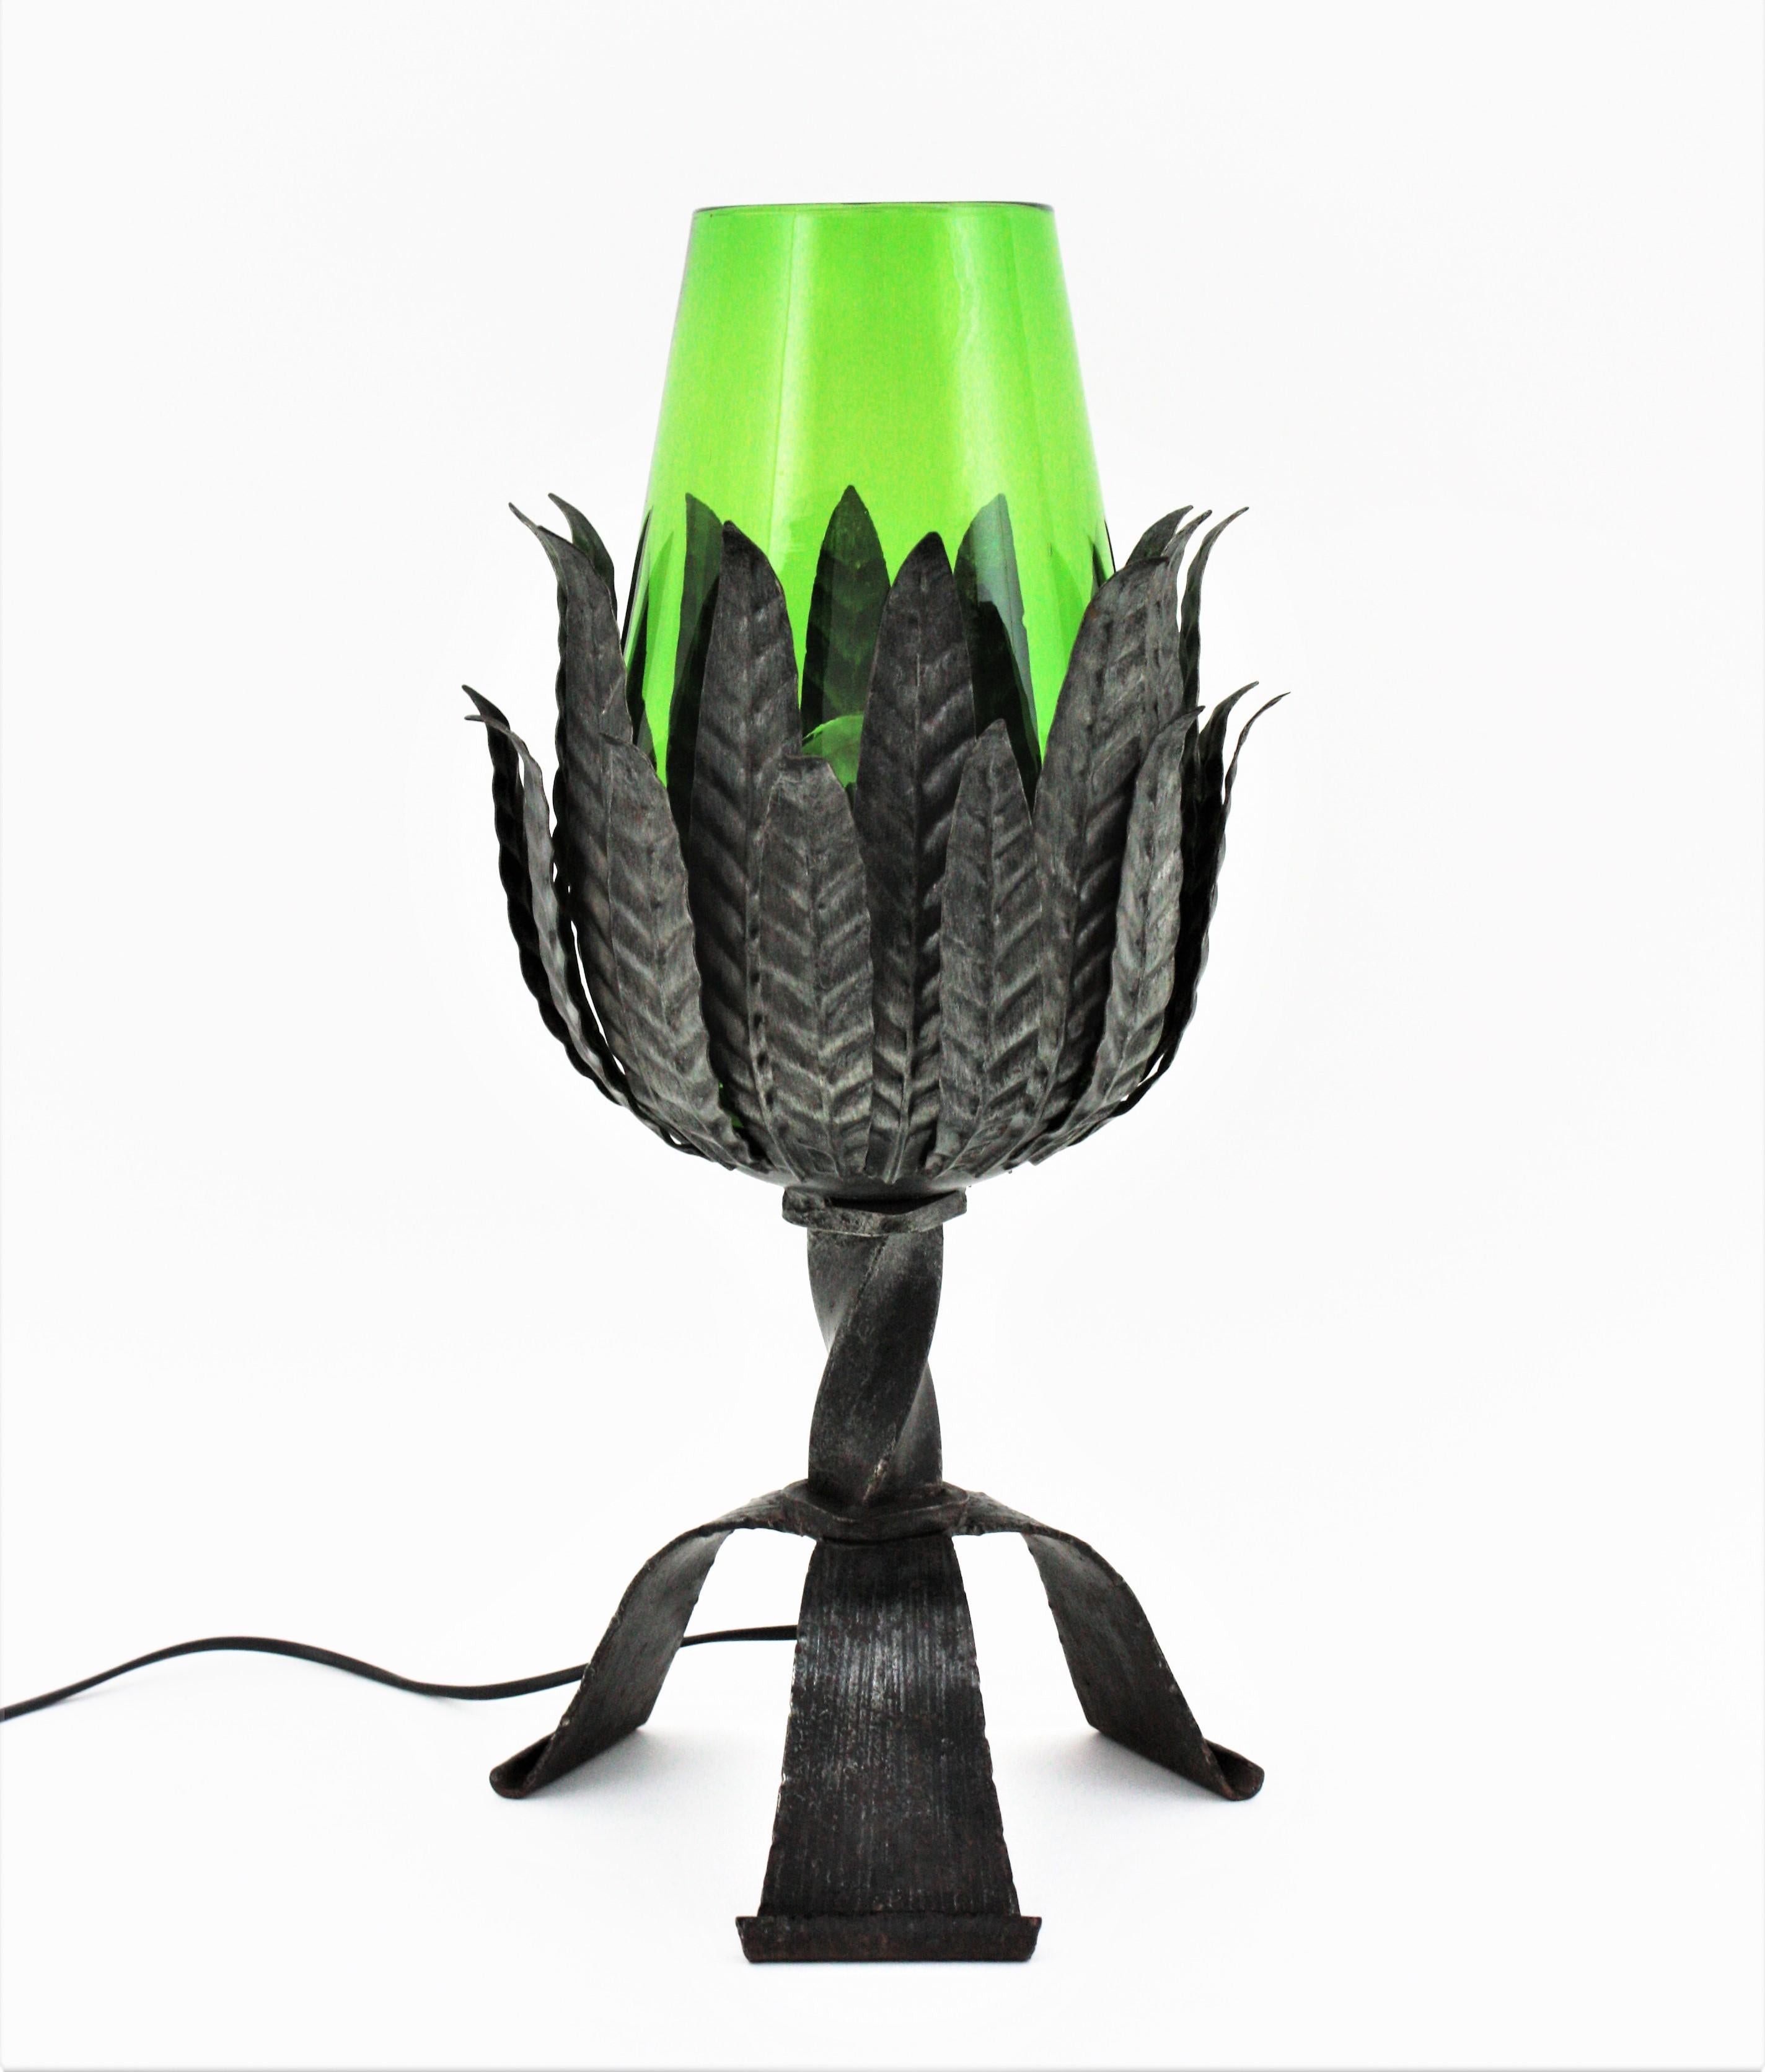 Spanish Table Lamp, Wrought Iron and Green Glass, 1950s For Sale 2